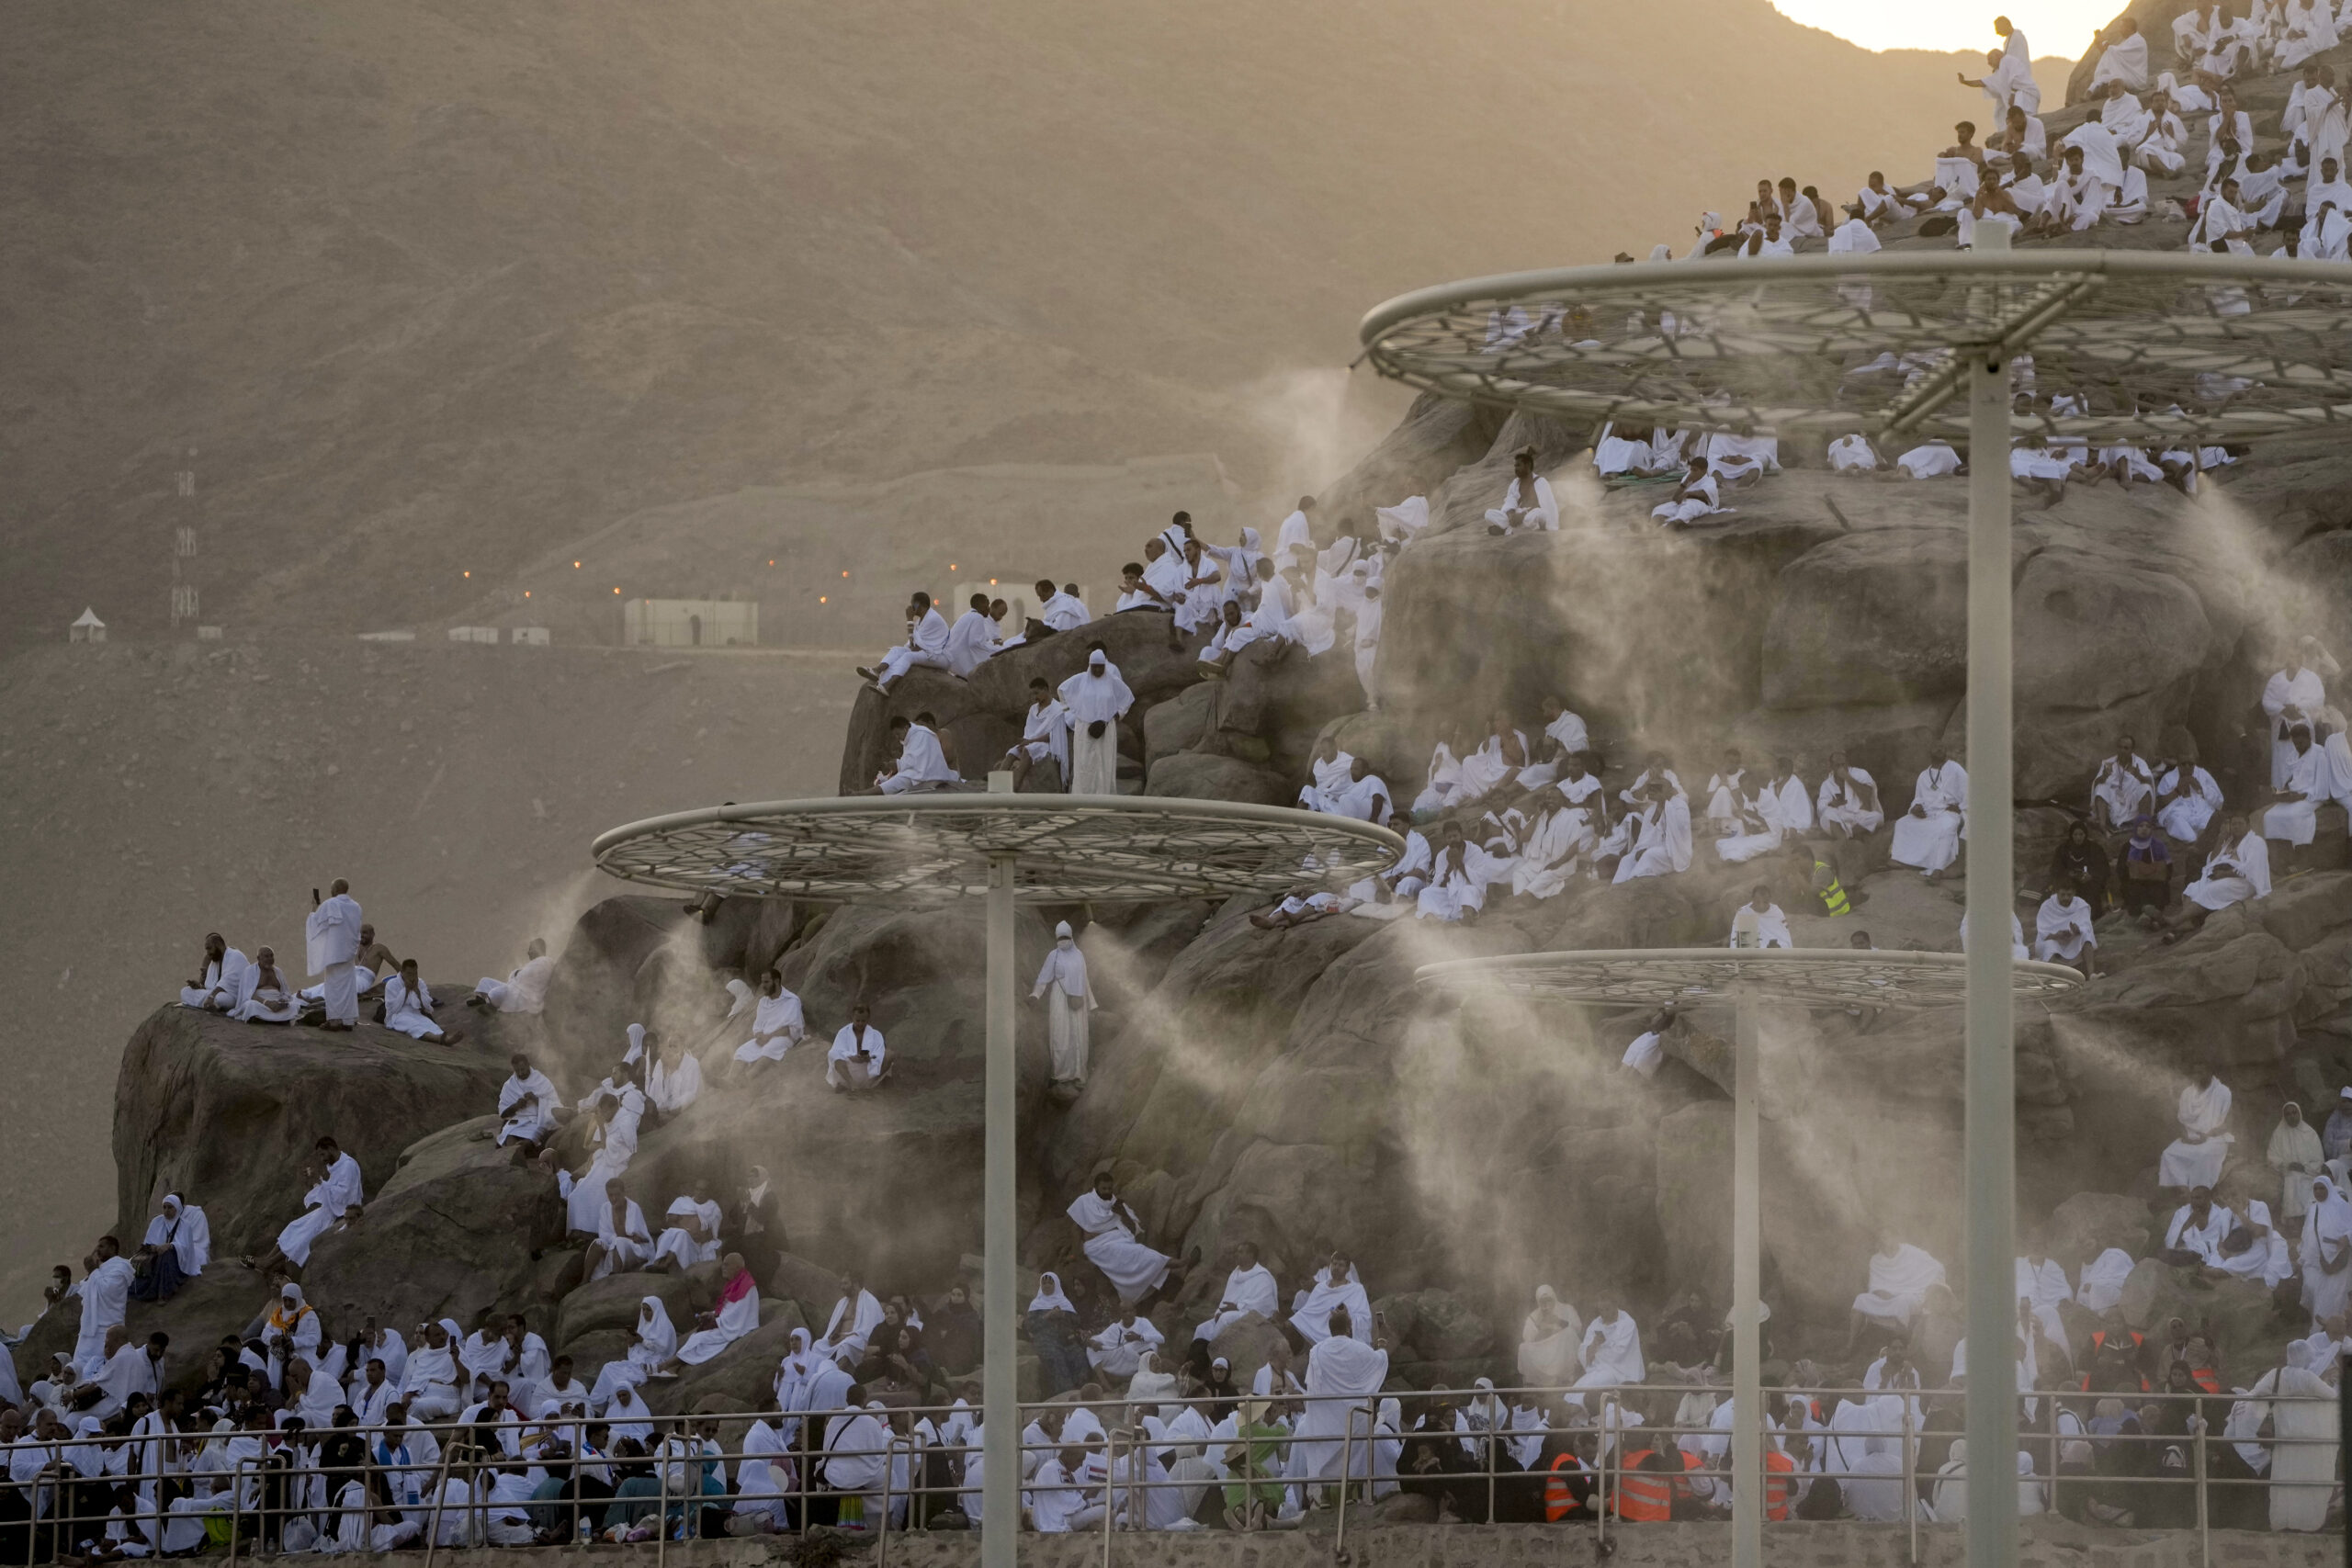 Water mist is sprayed on Muslim pilgrims as they pray on the rocky hill known as the Mountain of Mercy, on the Plain of Arafat, during the annual Hajj pilgrimage, near the holy city of Mecca, Saudi Arabia, Tuesday, June 27, 2023. Around two million pilgrims are converging on Saudi Arabia's holy city of Mecca for the largest Hajj since the coronavirus pandemic severely curtailed access to one of Islam's five pillars. (AP Photo/Amr Nabil)